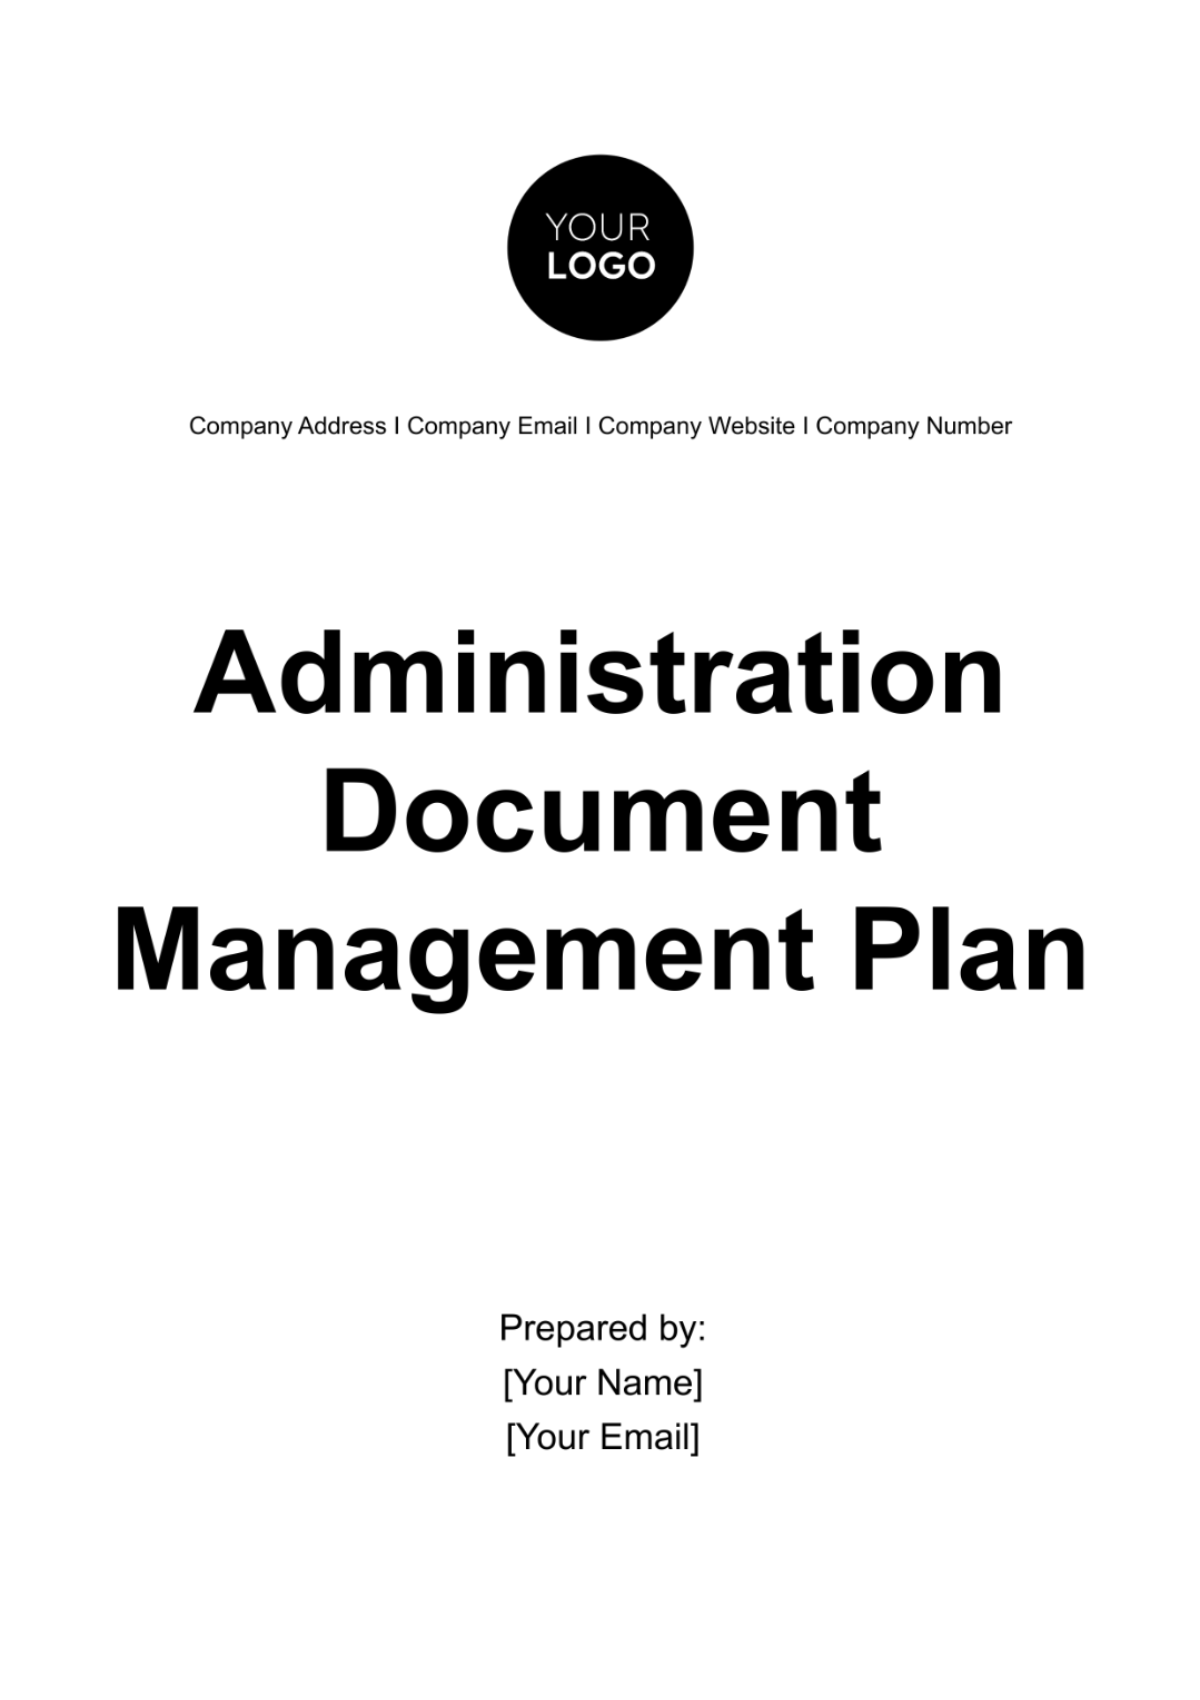 Administration Document Management Plan Template